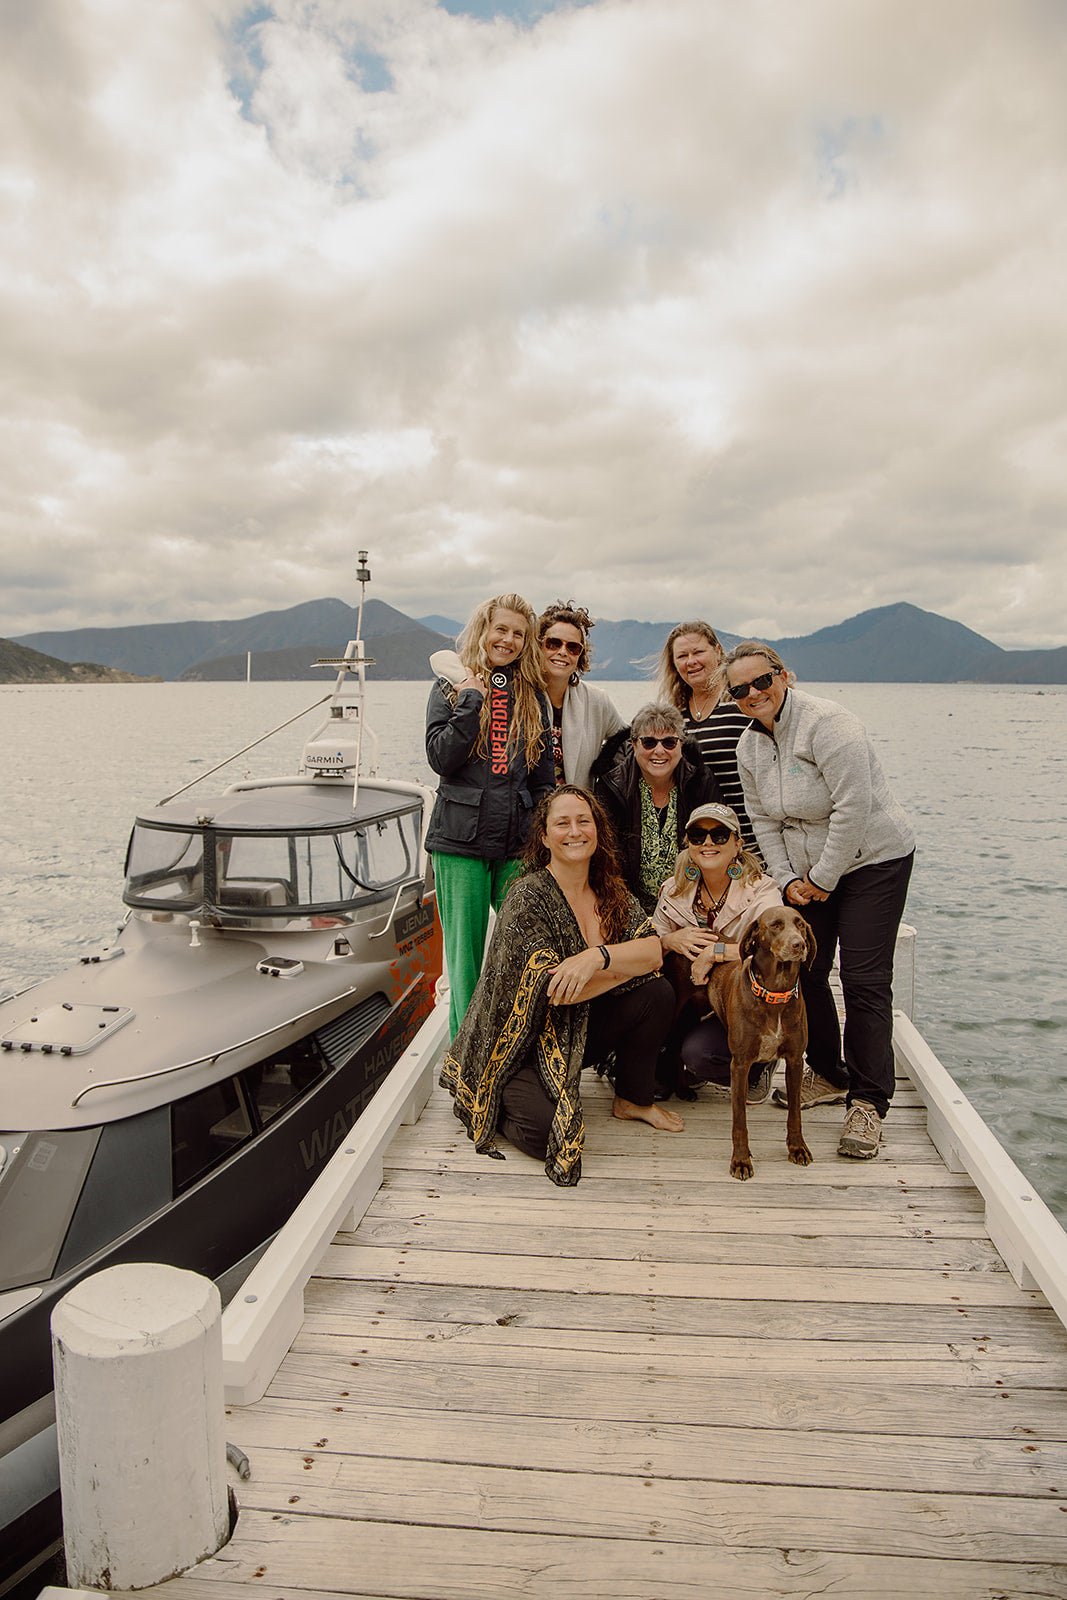 Rewild Retreat: An Expedition of Self Discovery - Waitata Bay / Pelorus Sound 27th Feb to 3rd March 2025